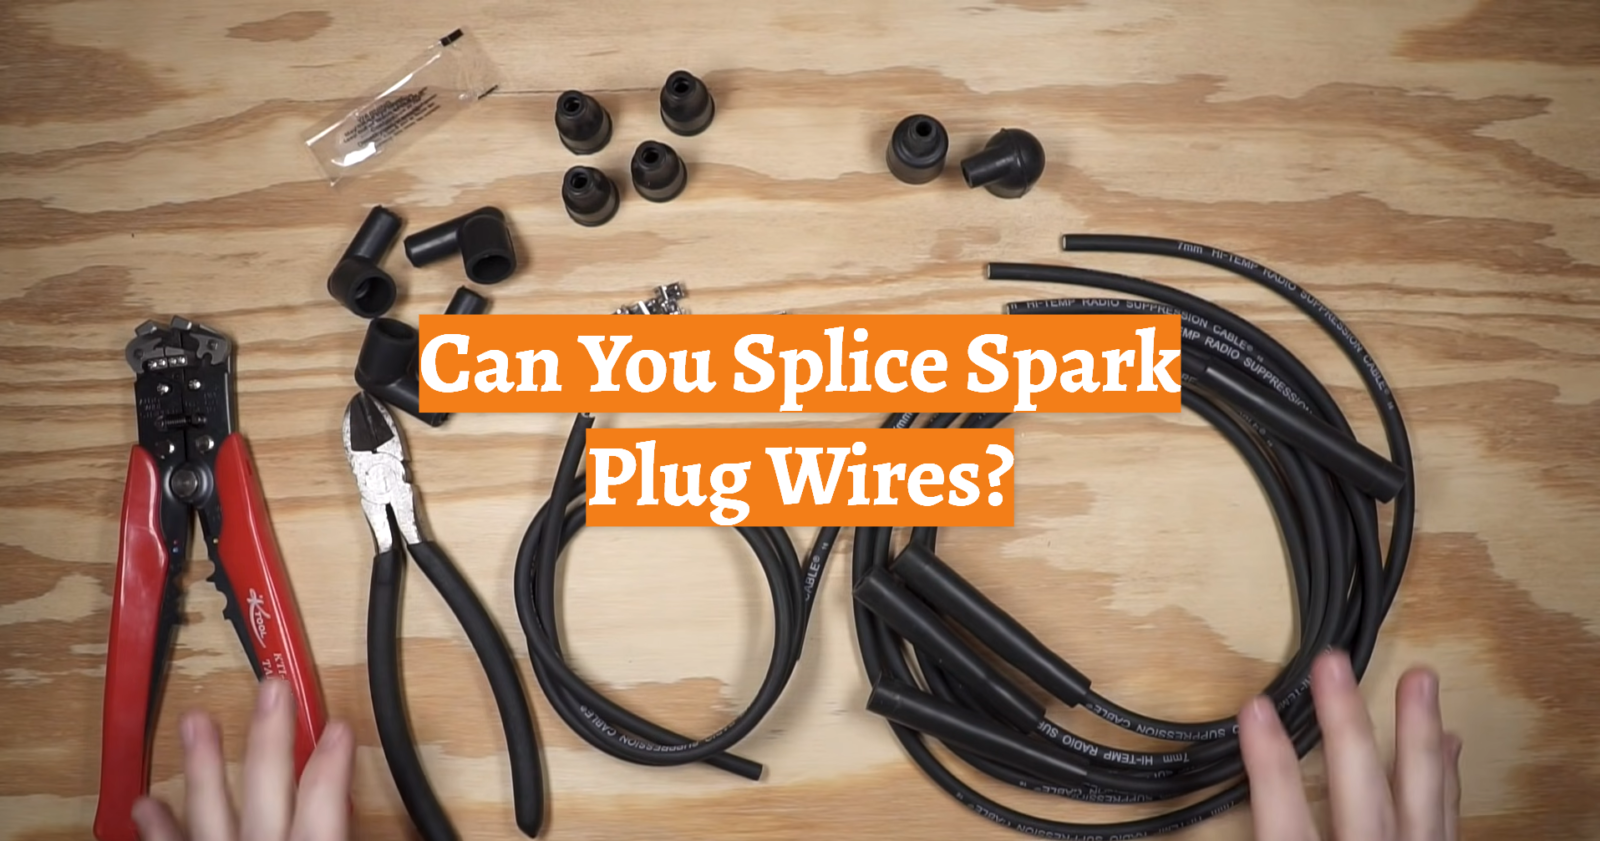 Can You Splice Spark Plug Wires?